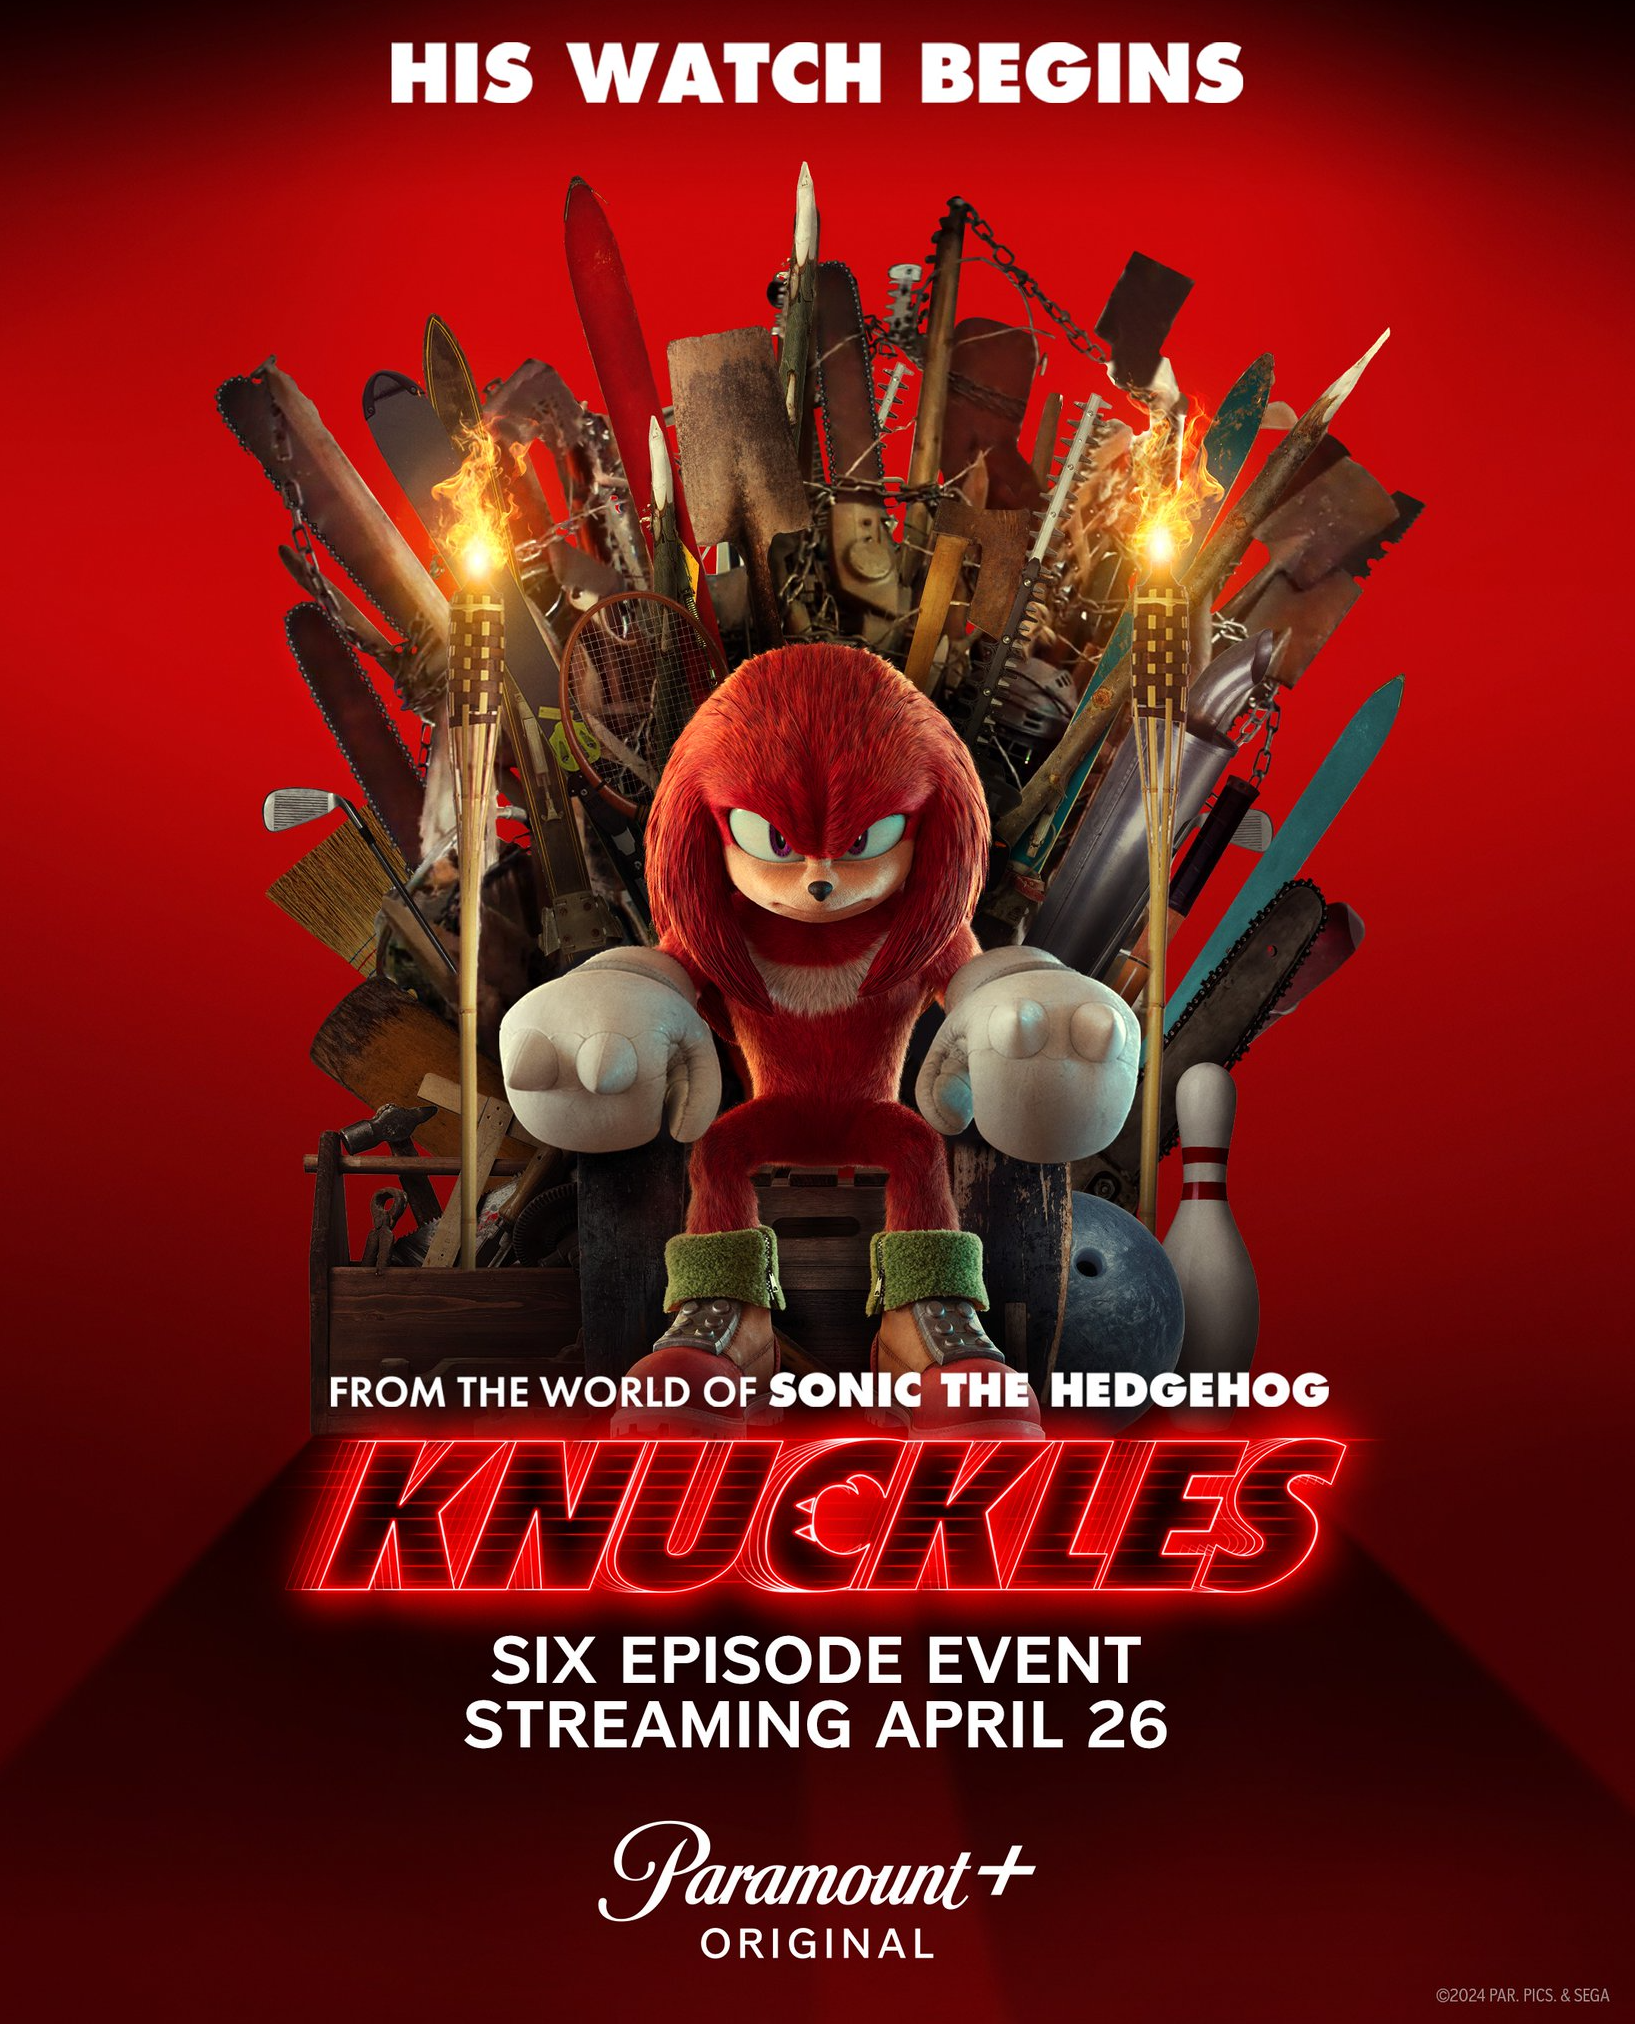 Sonic the hedgehog character, KNUCKLES, gets a TV series.